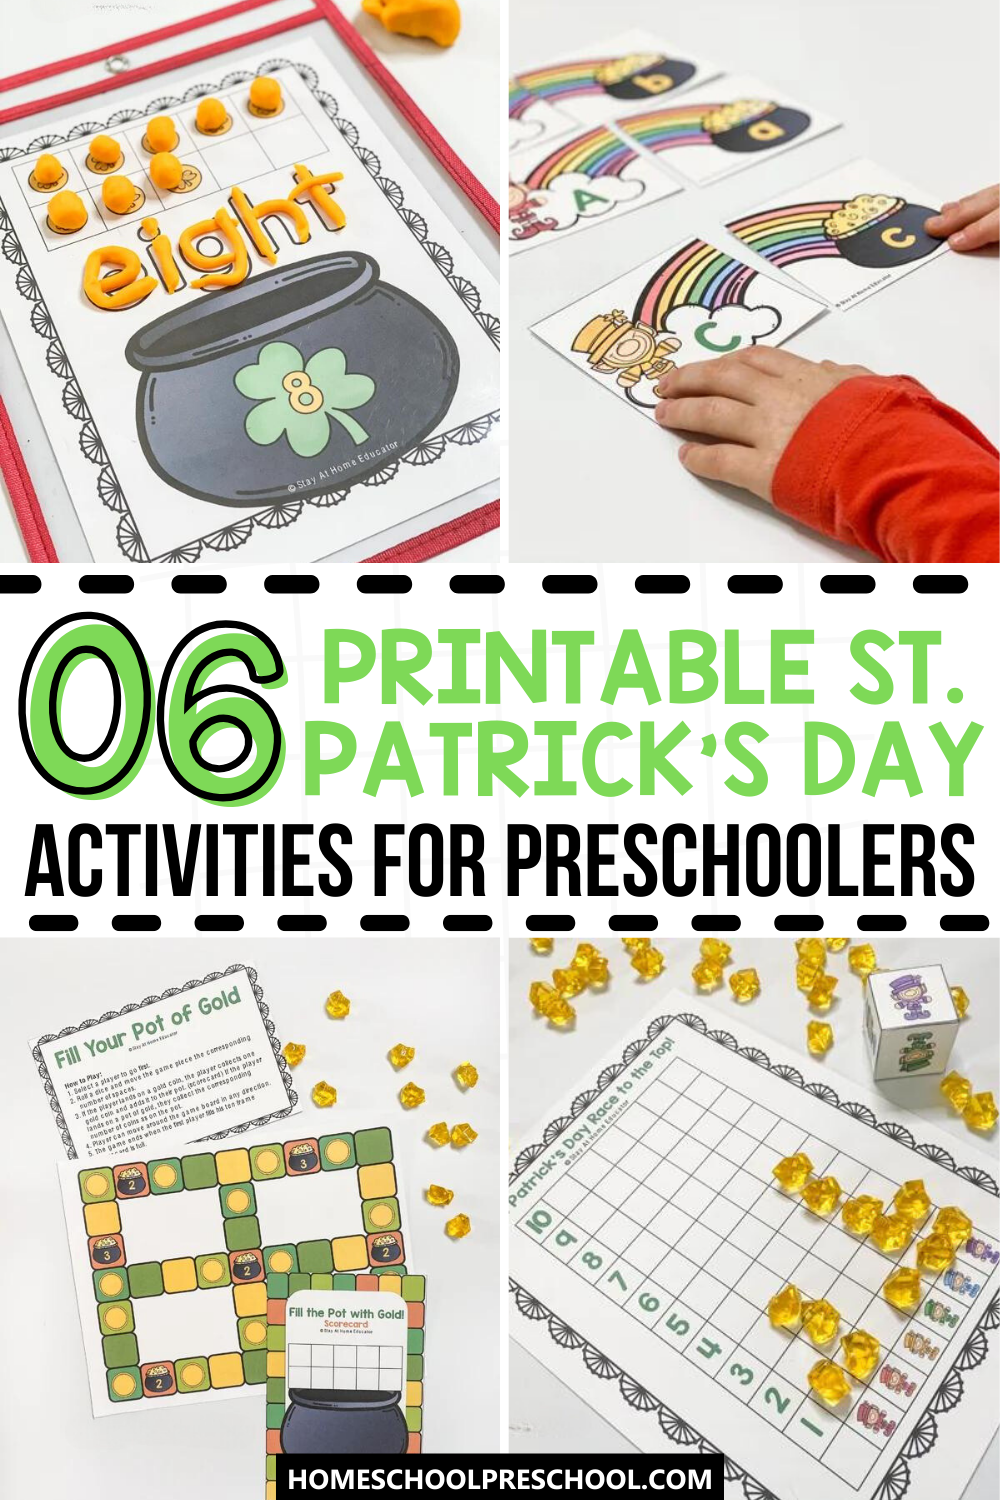 6 Printable St. Patrick's Day Activities for Preschoolers | Collage of printable activities | a graphing game with dice and gold gems to learn simple numbers | fill your pot of gold game board and score card with gold coins | counting mat number 8 with play dough balls and the number word eight rolled in playdough | alphabet matching with rainbow puzzle cards, pictured capital letter C and lowercase letter c | printable St. Patrick's day activities